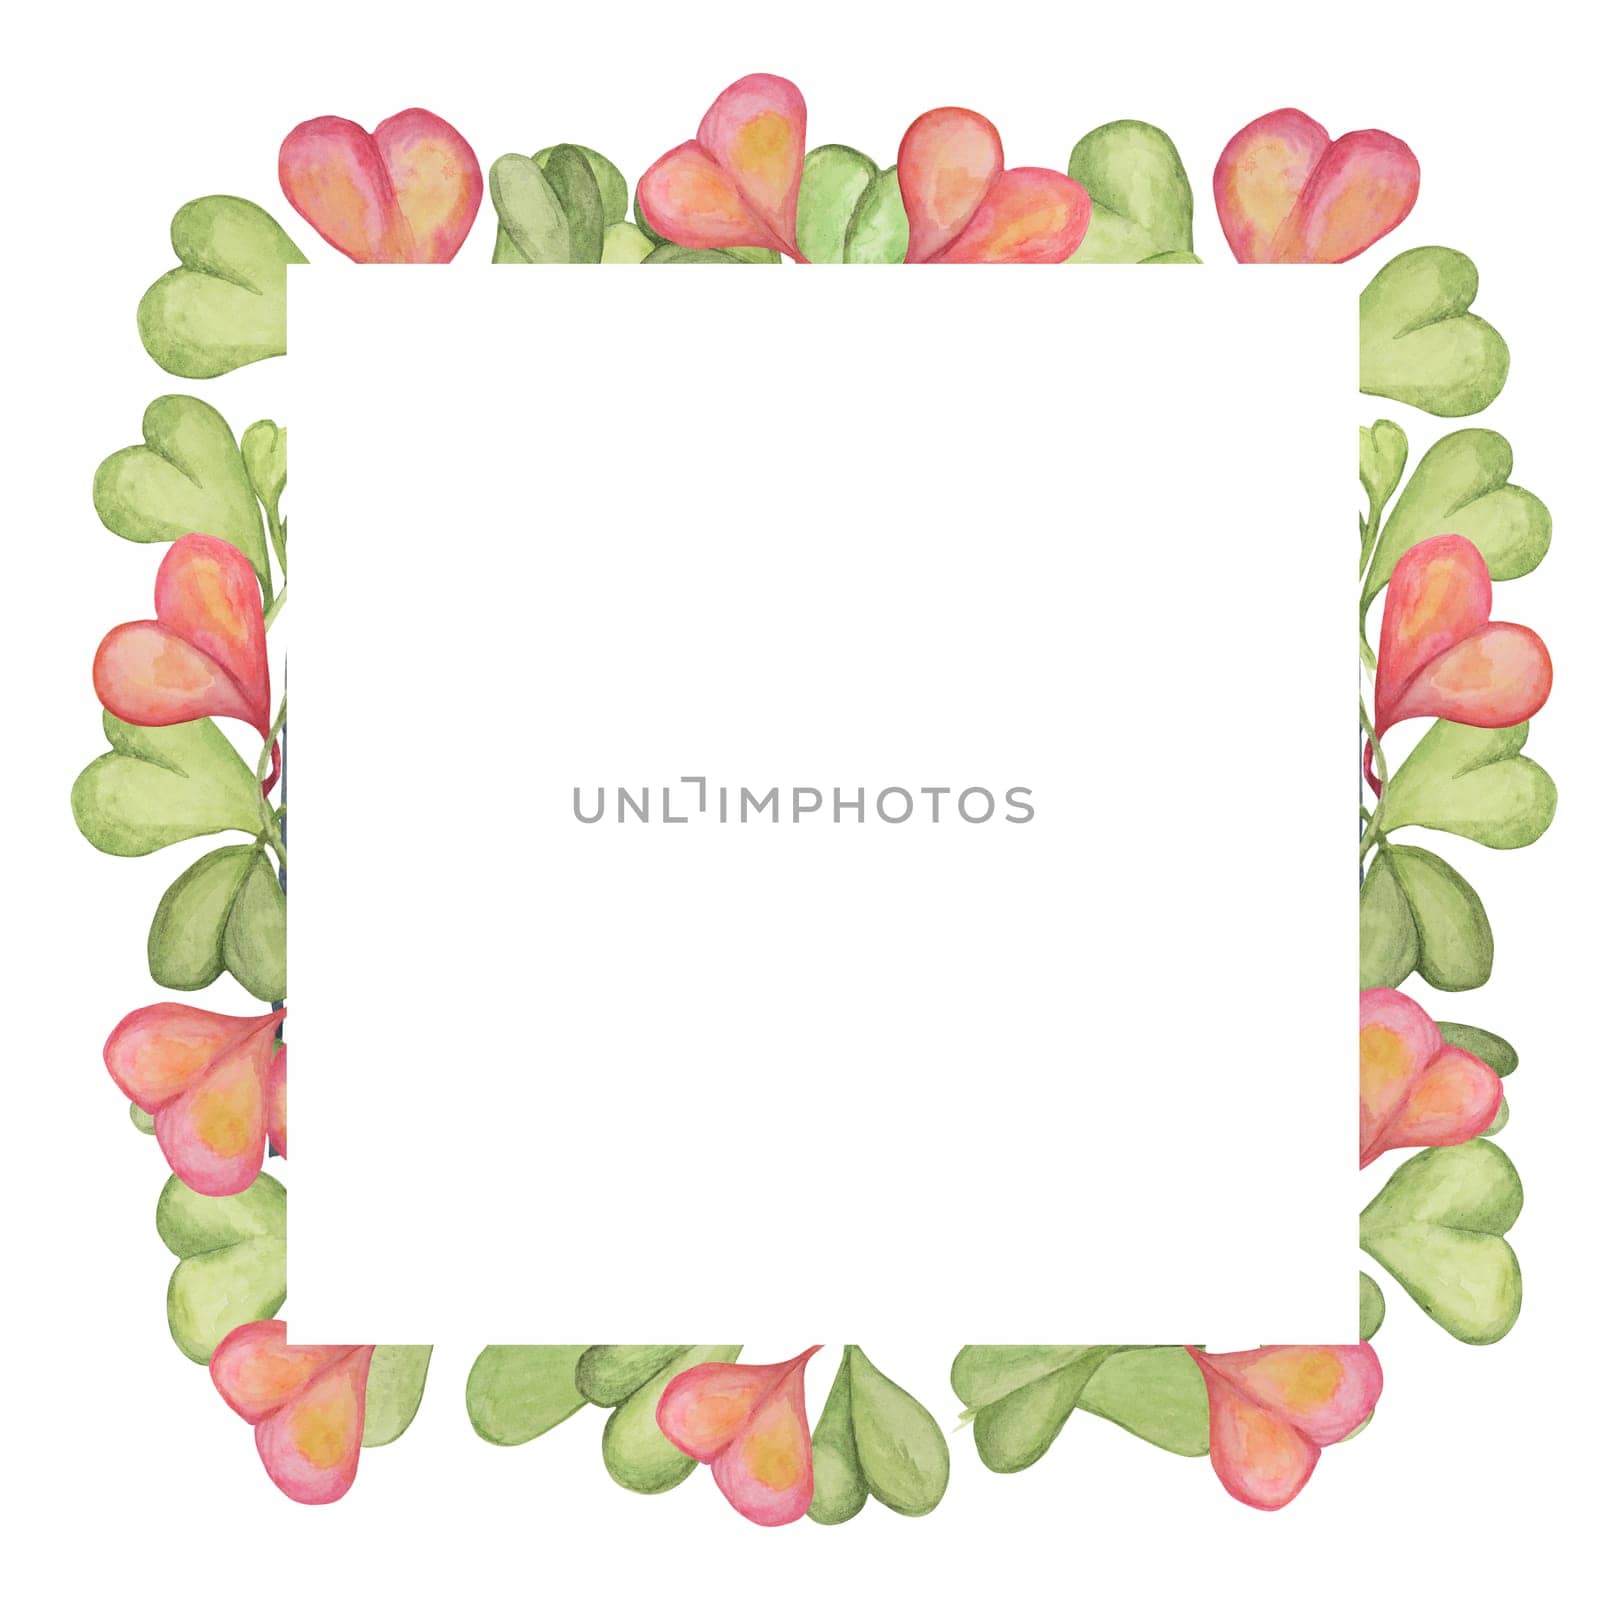 Square frame with blank space sweetheart hoya, hoya kerrii plant in pink and green, isolated hand drawn watercolor. Clipart for Mothers, Fathers day design for printing, cards, gift wrapping, textile